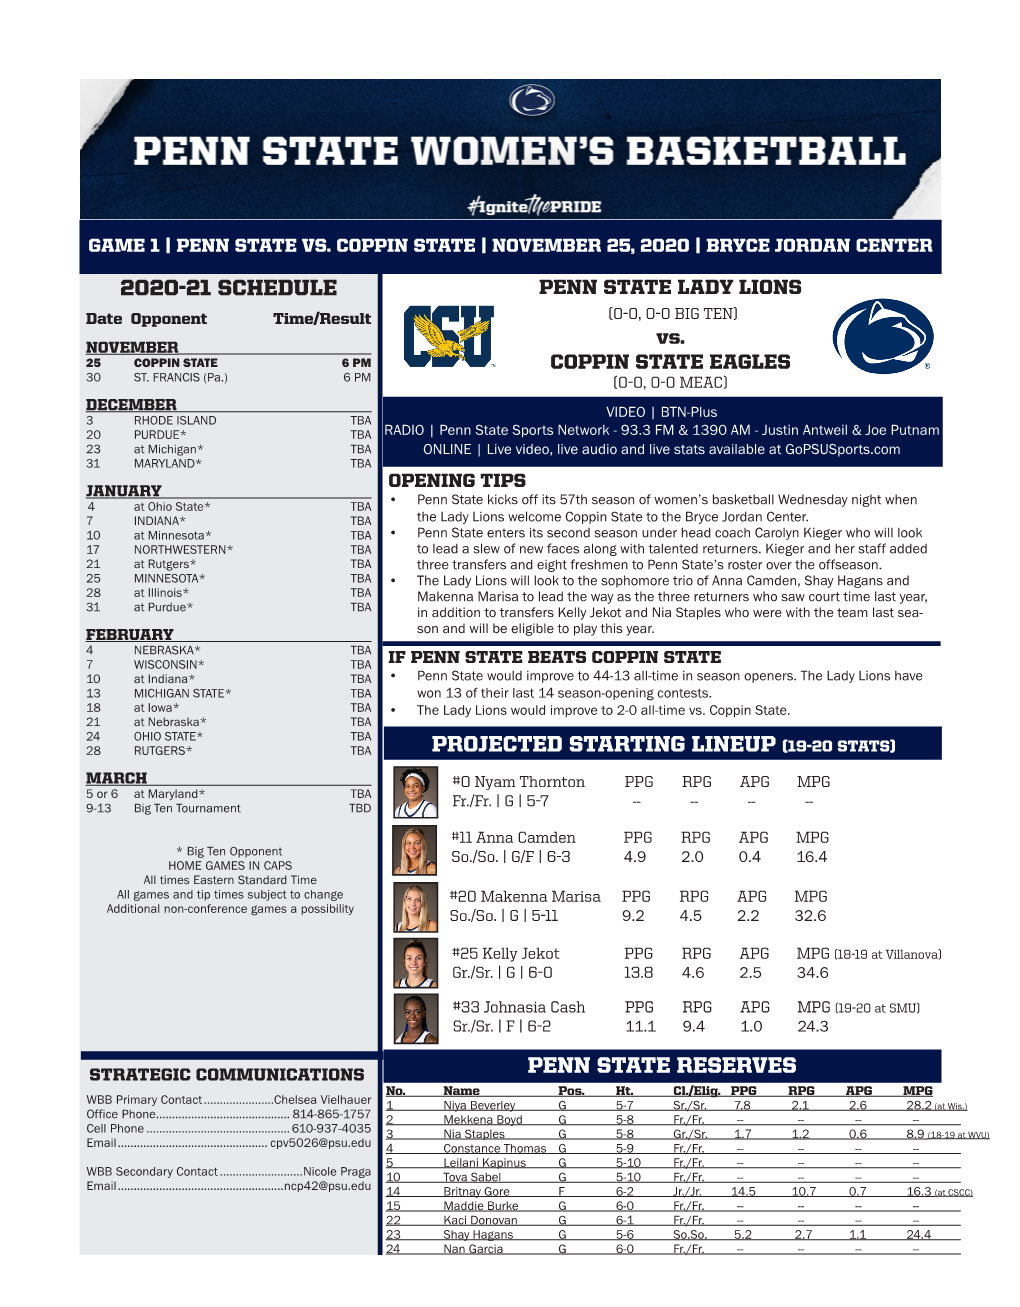 (19-20 Stats) Penn State Reserves 2020-21 Schedule